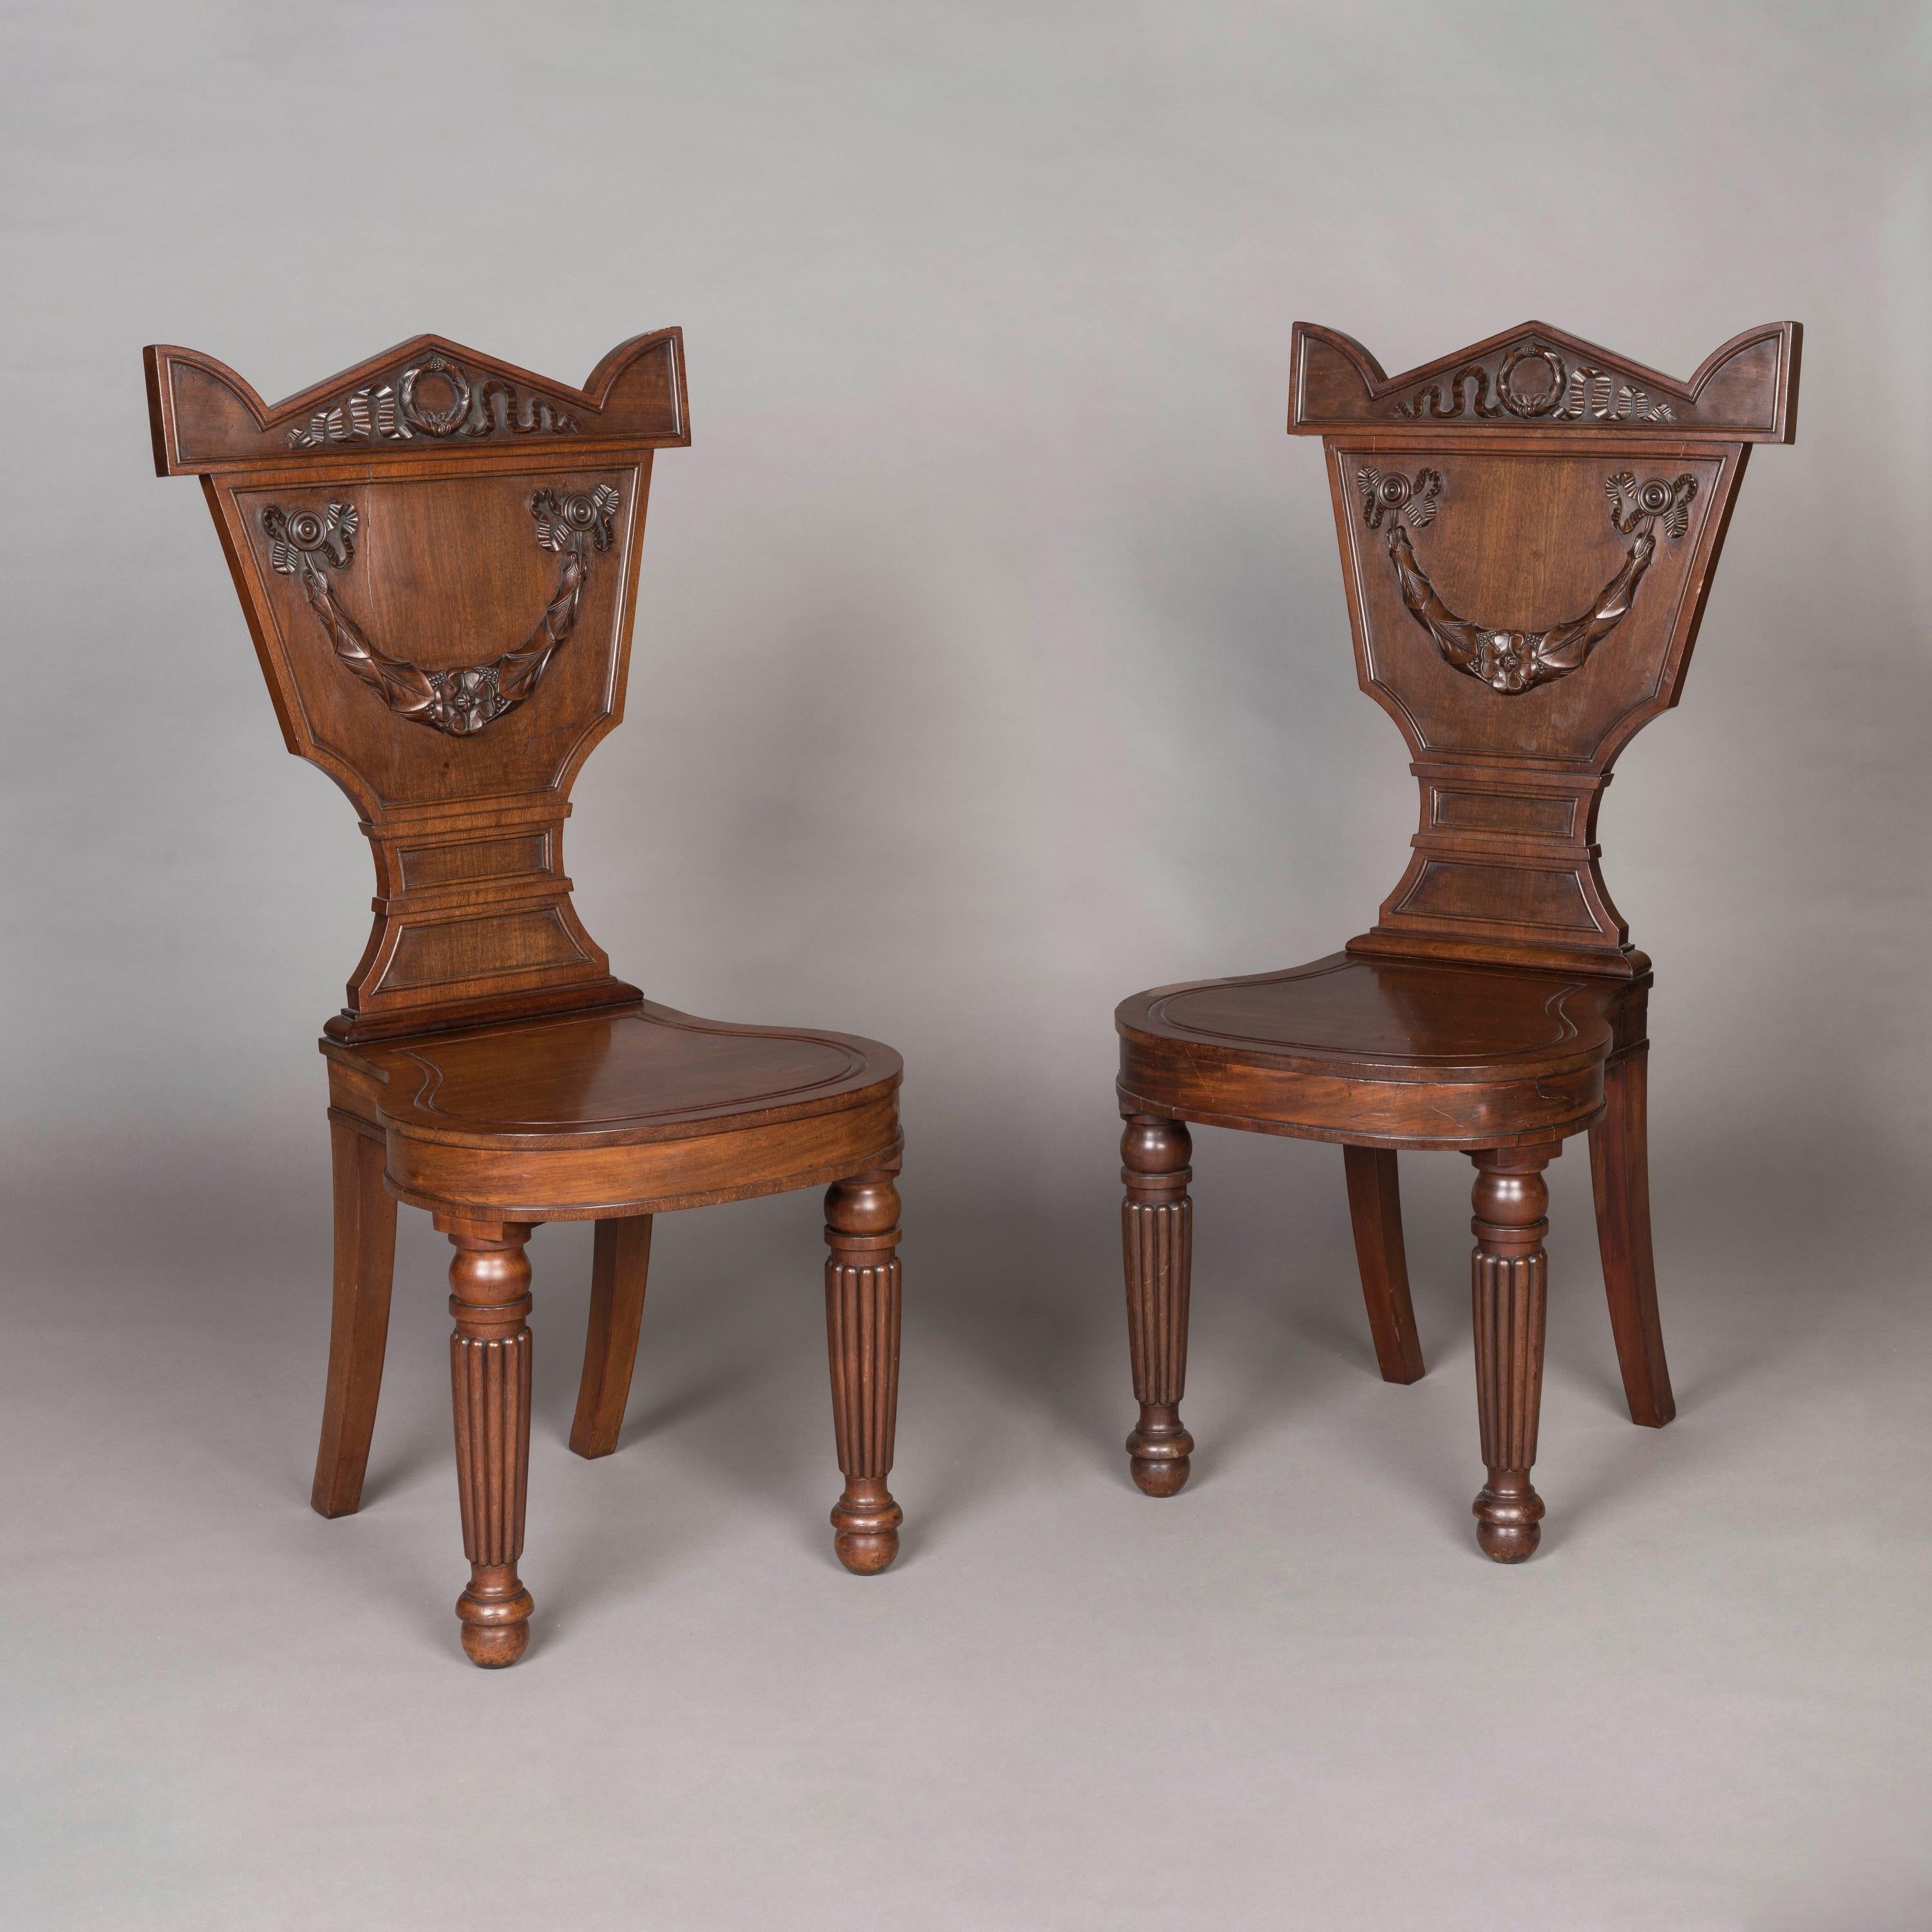 George IV Pair of 19th Century Georgian Period Carved Mahogany Chairs For Sale